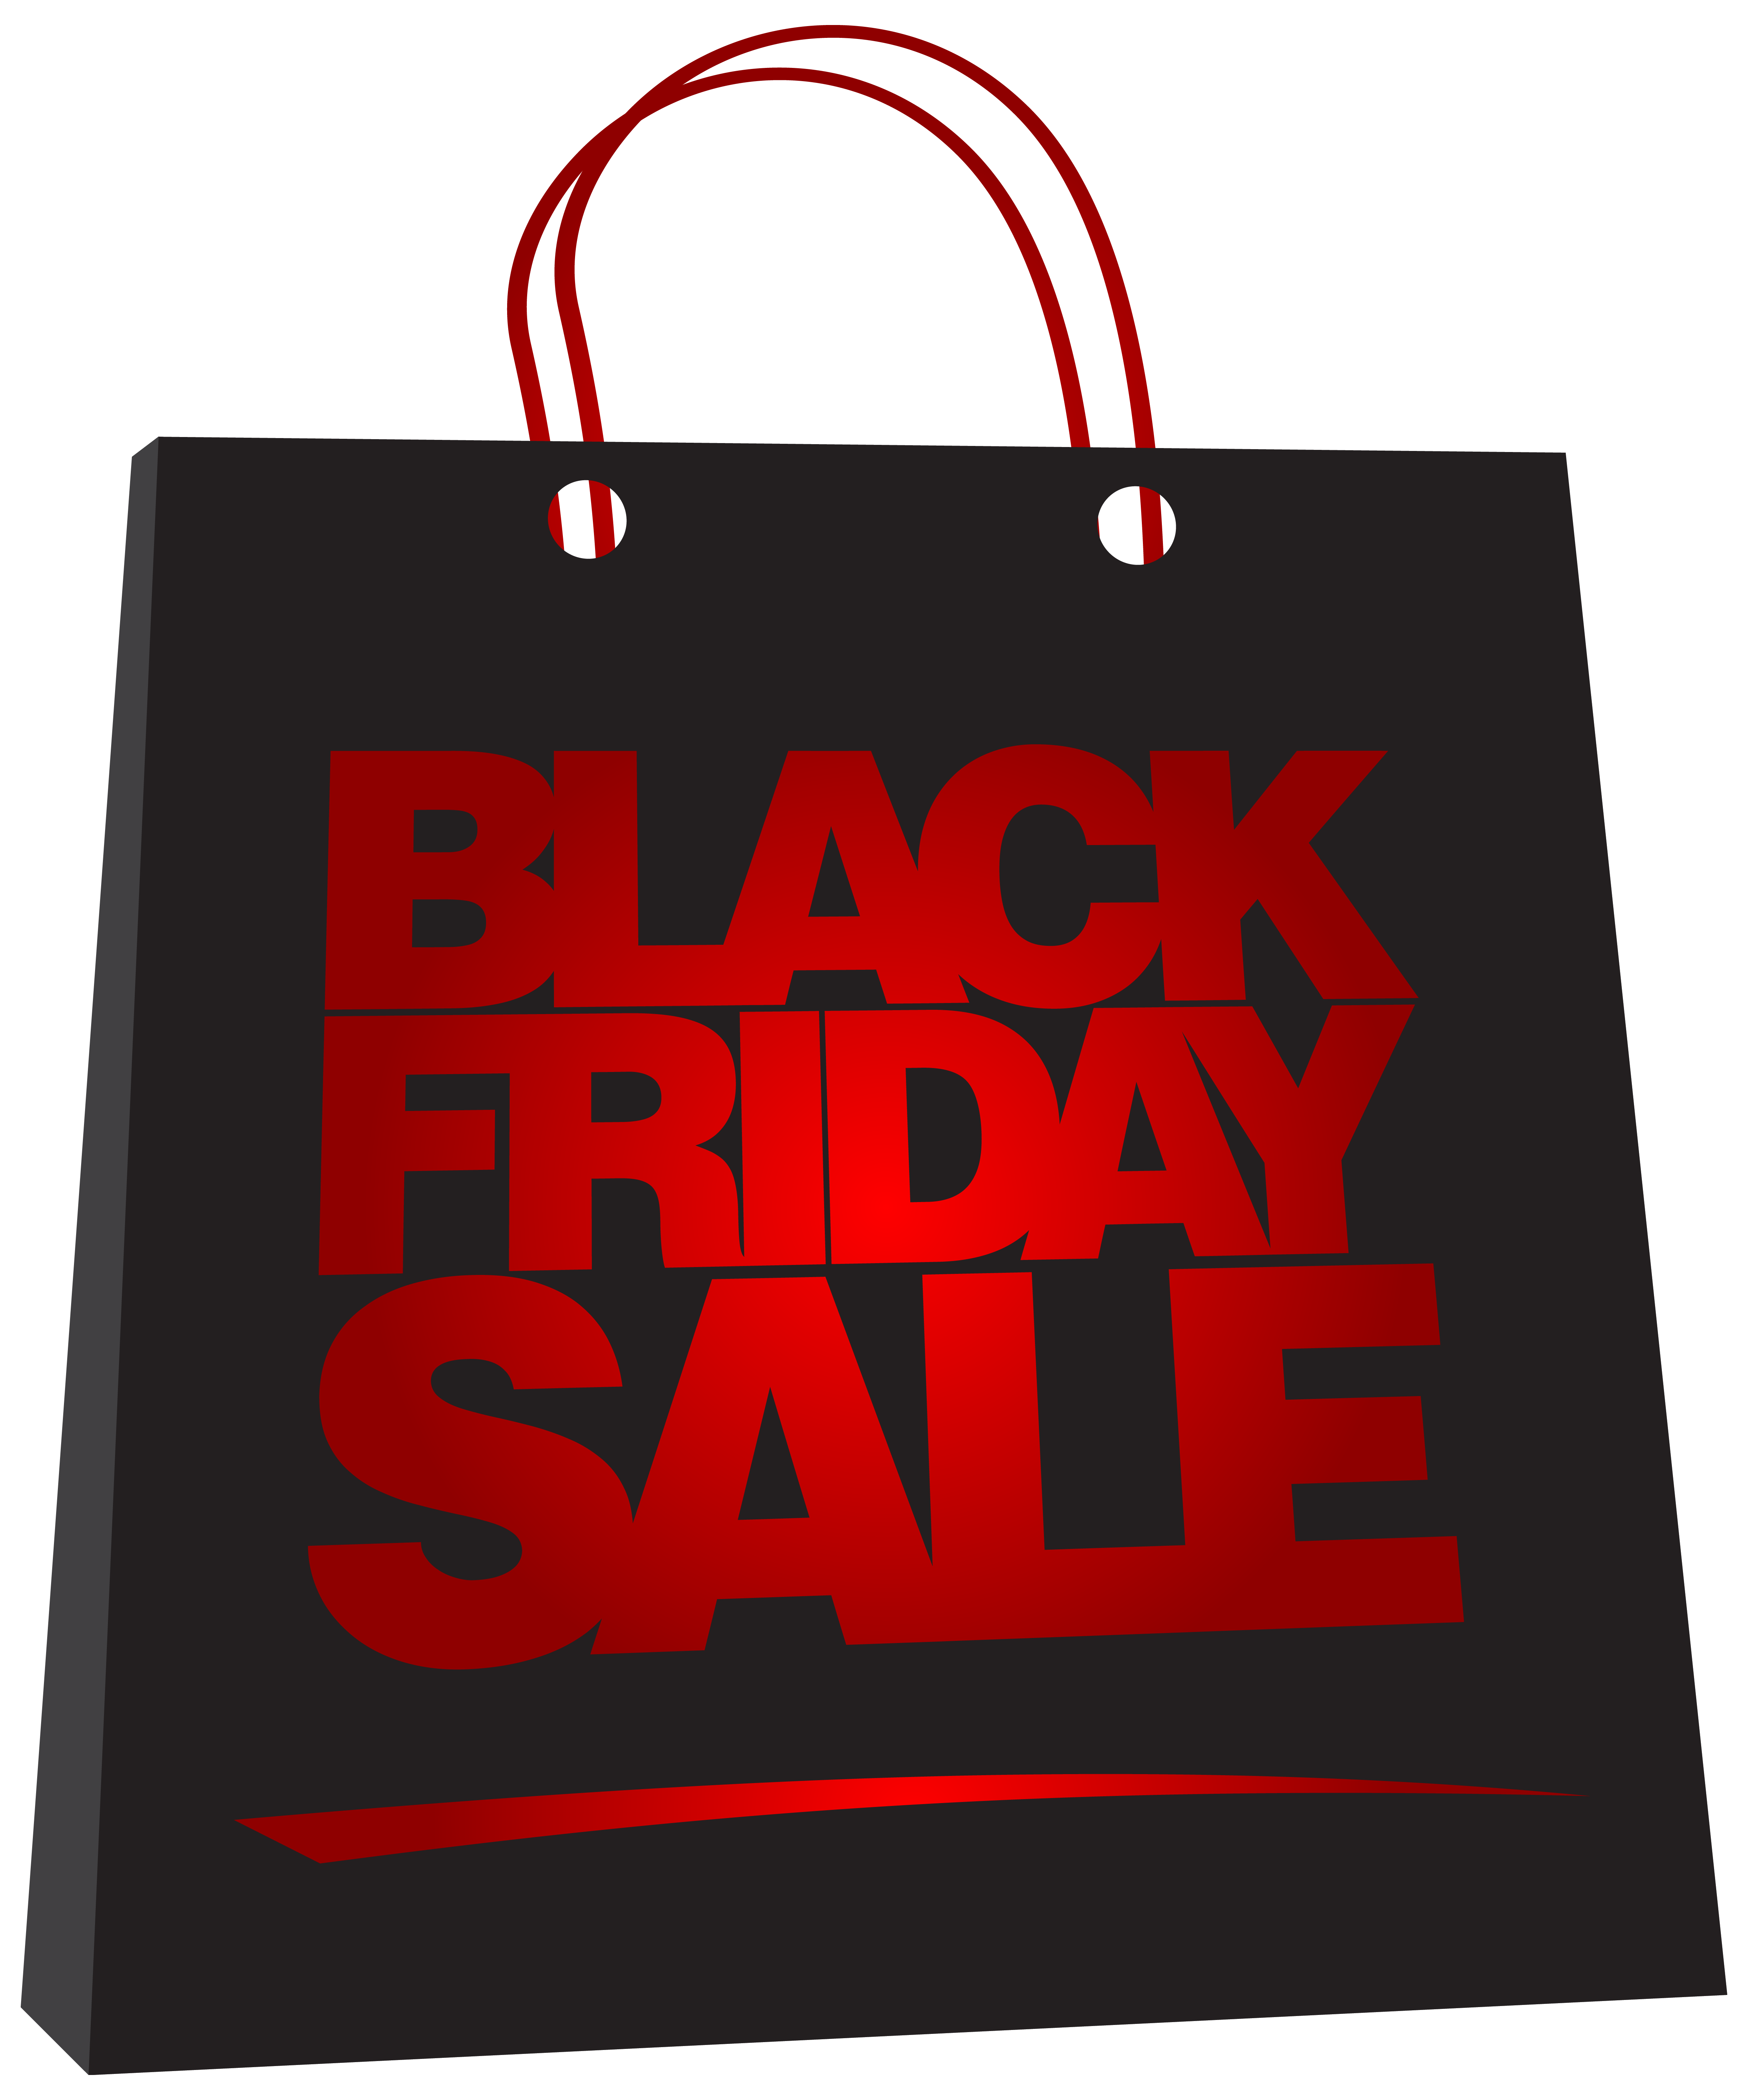 Black Bag Black Friday Sale PNG Image Clipart | Gallery Yopriceville - High-Quality Images and ...